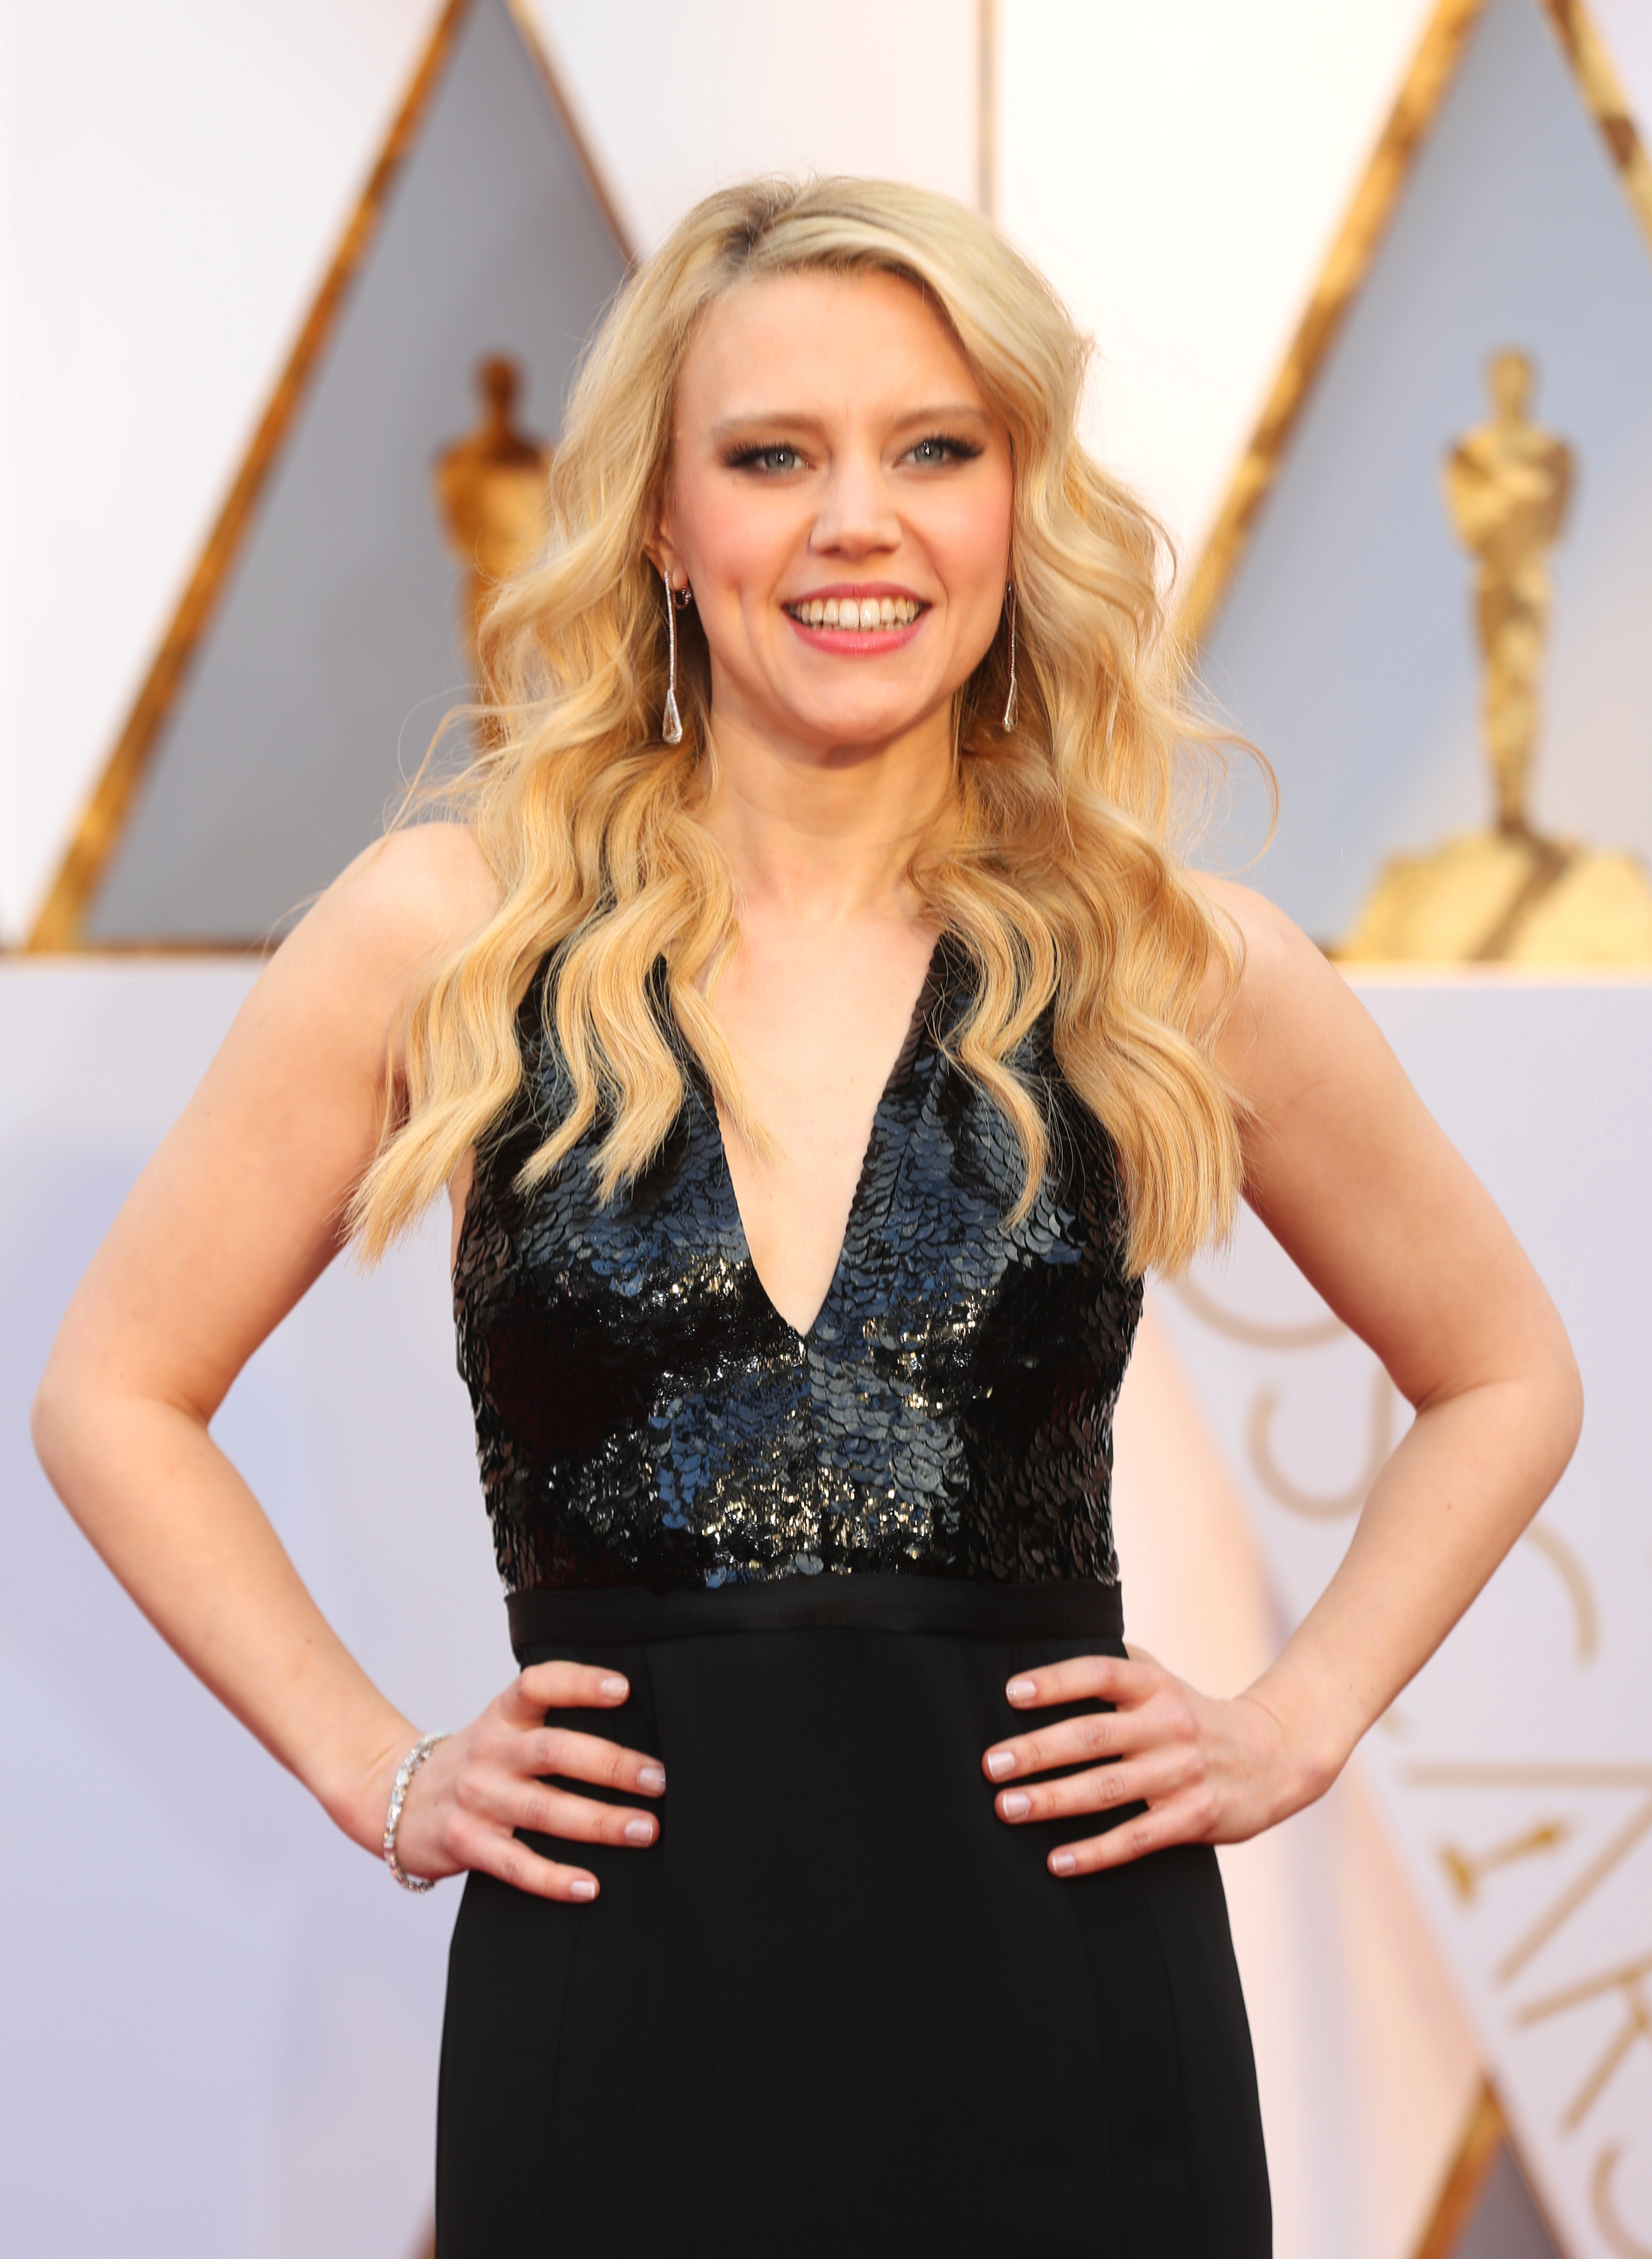 89th Academy Awards - Oscars Red Carpet Arrivals - Hollywood, California, U.S. - 26/02/17 - Kate McKinnon poses on the red carpet. REUTERS/Mike Blake - HP1ED2R04NWAF